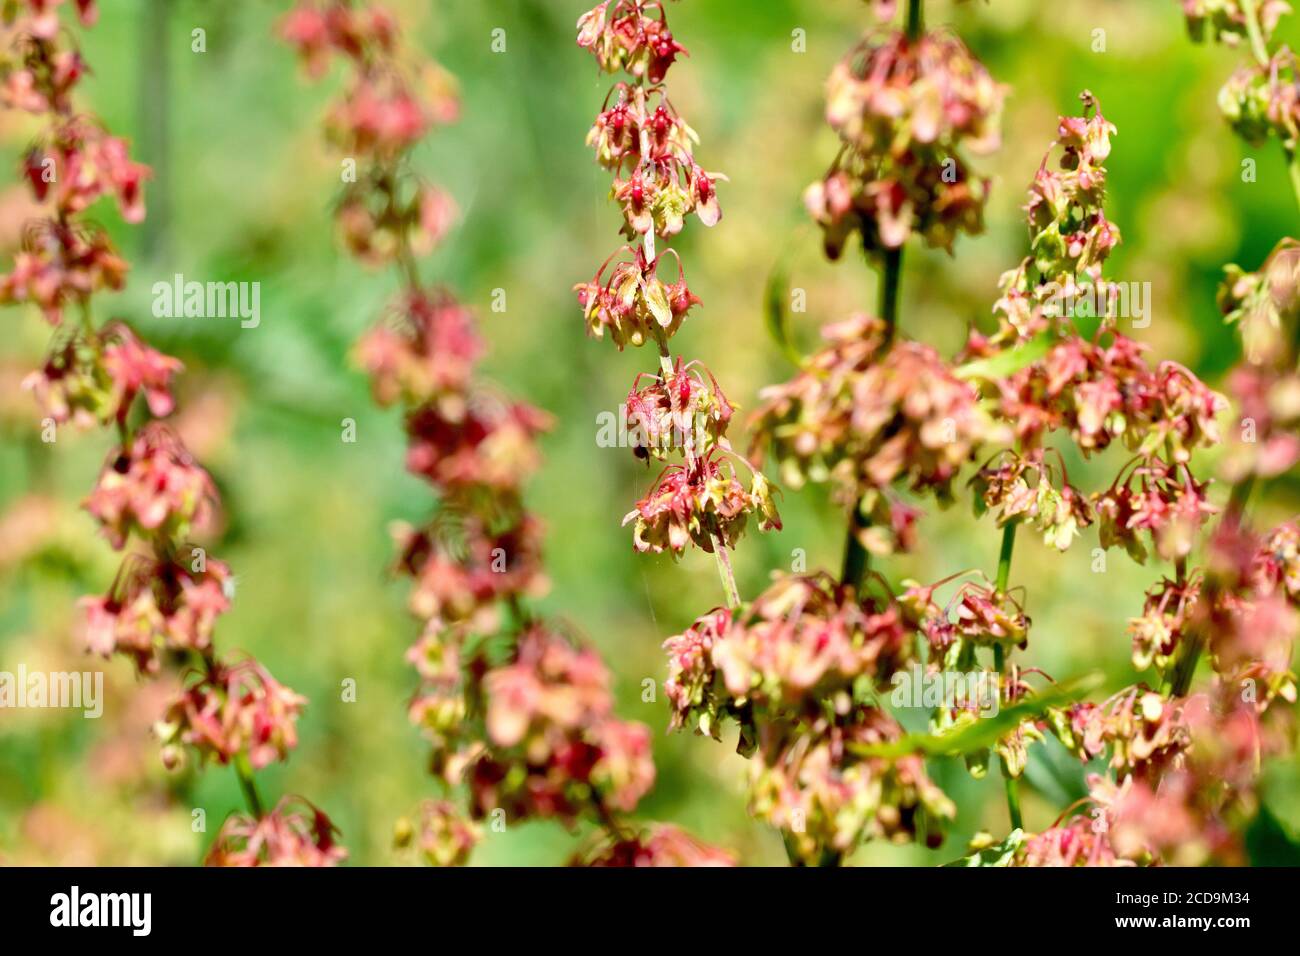 Broad-leaved Dock (rumex obtusifolius), close up showing the fruit or seed pods developing on the plant. Stock Photo